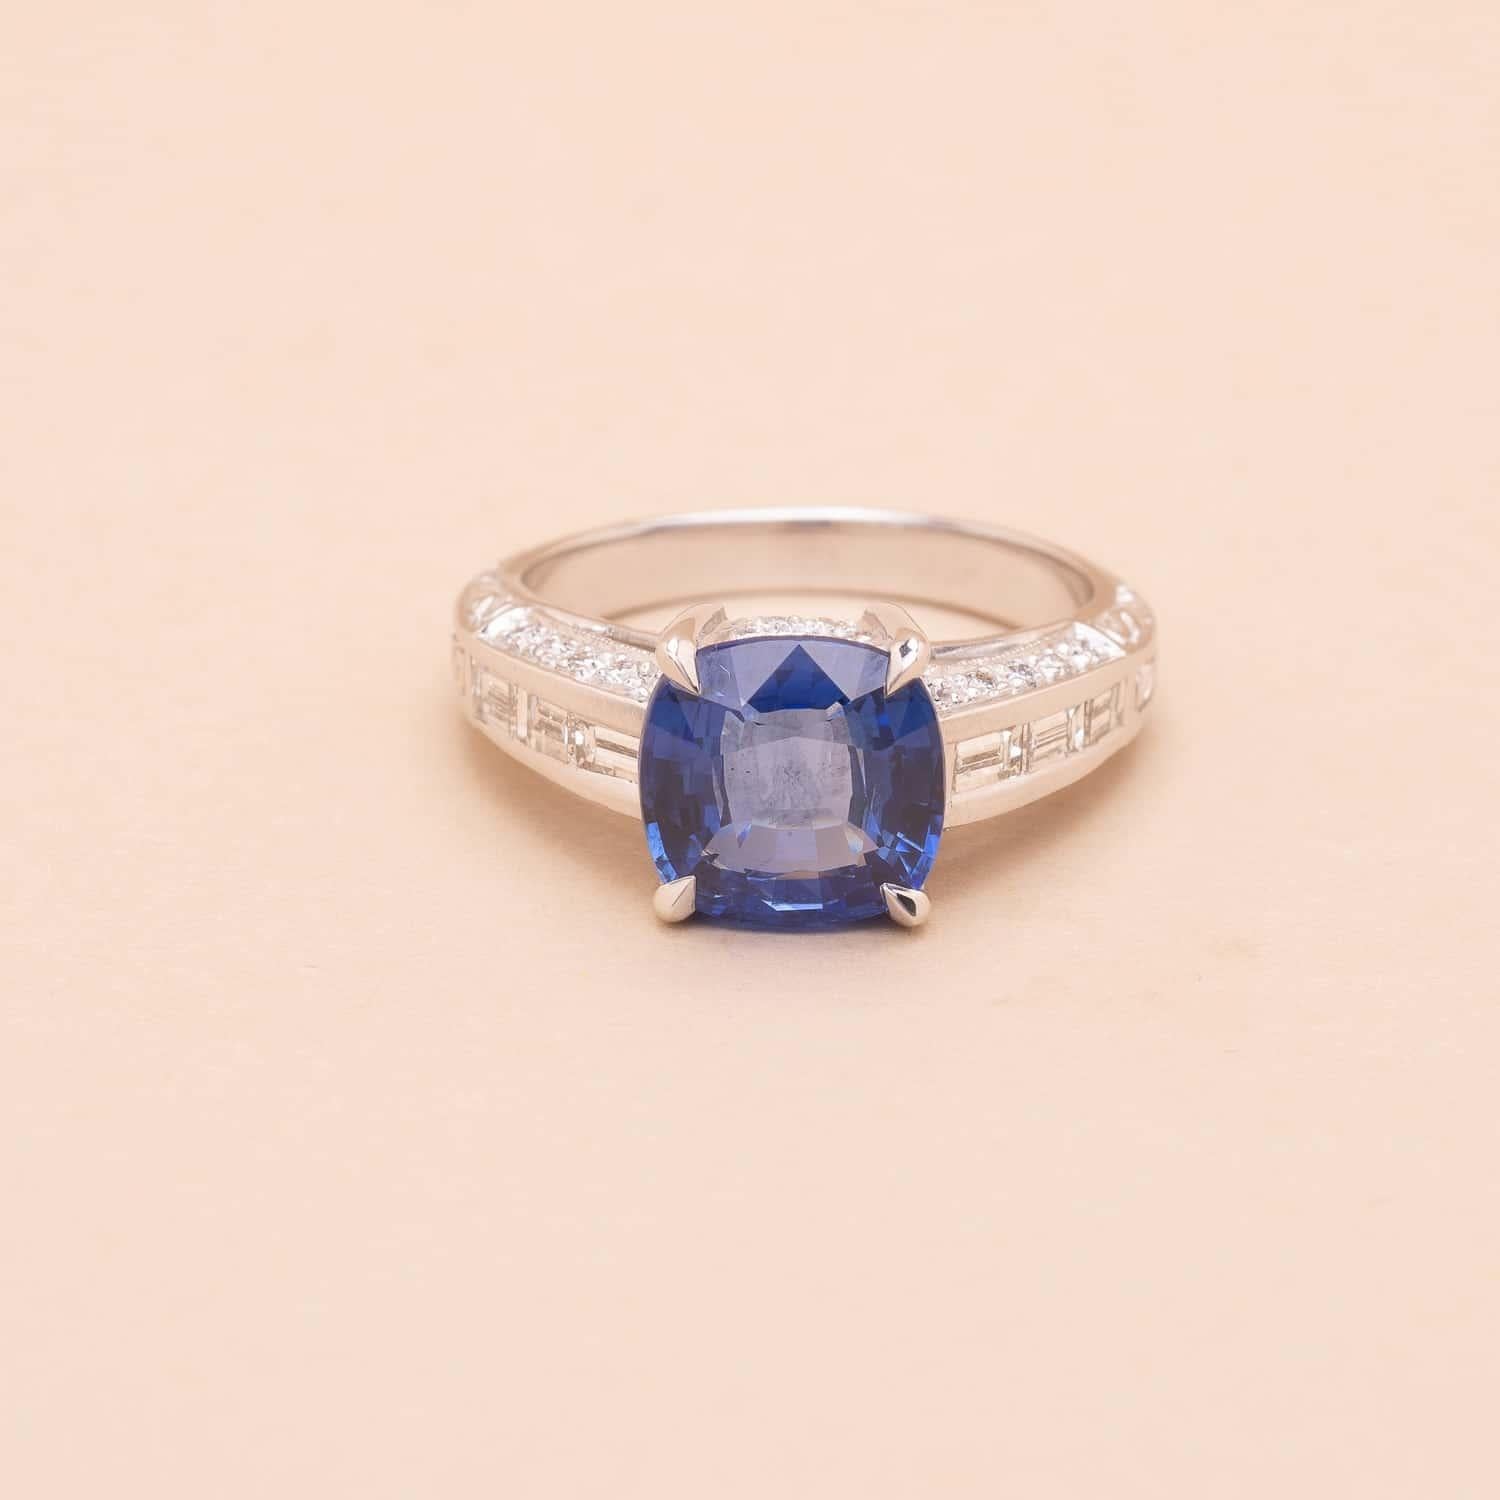 3.37 carat cushion-cut sapphire, round and baguette-cut diamonds ring. 
Gem Paris certified sapphire 
Estimated weight of the diamonds : 0.80 carat total 
Estimated characteristics : color F, purity VS
Art Deco style but contemporary made. Perfect